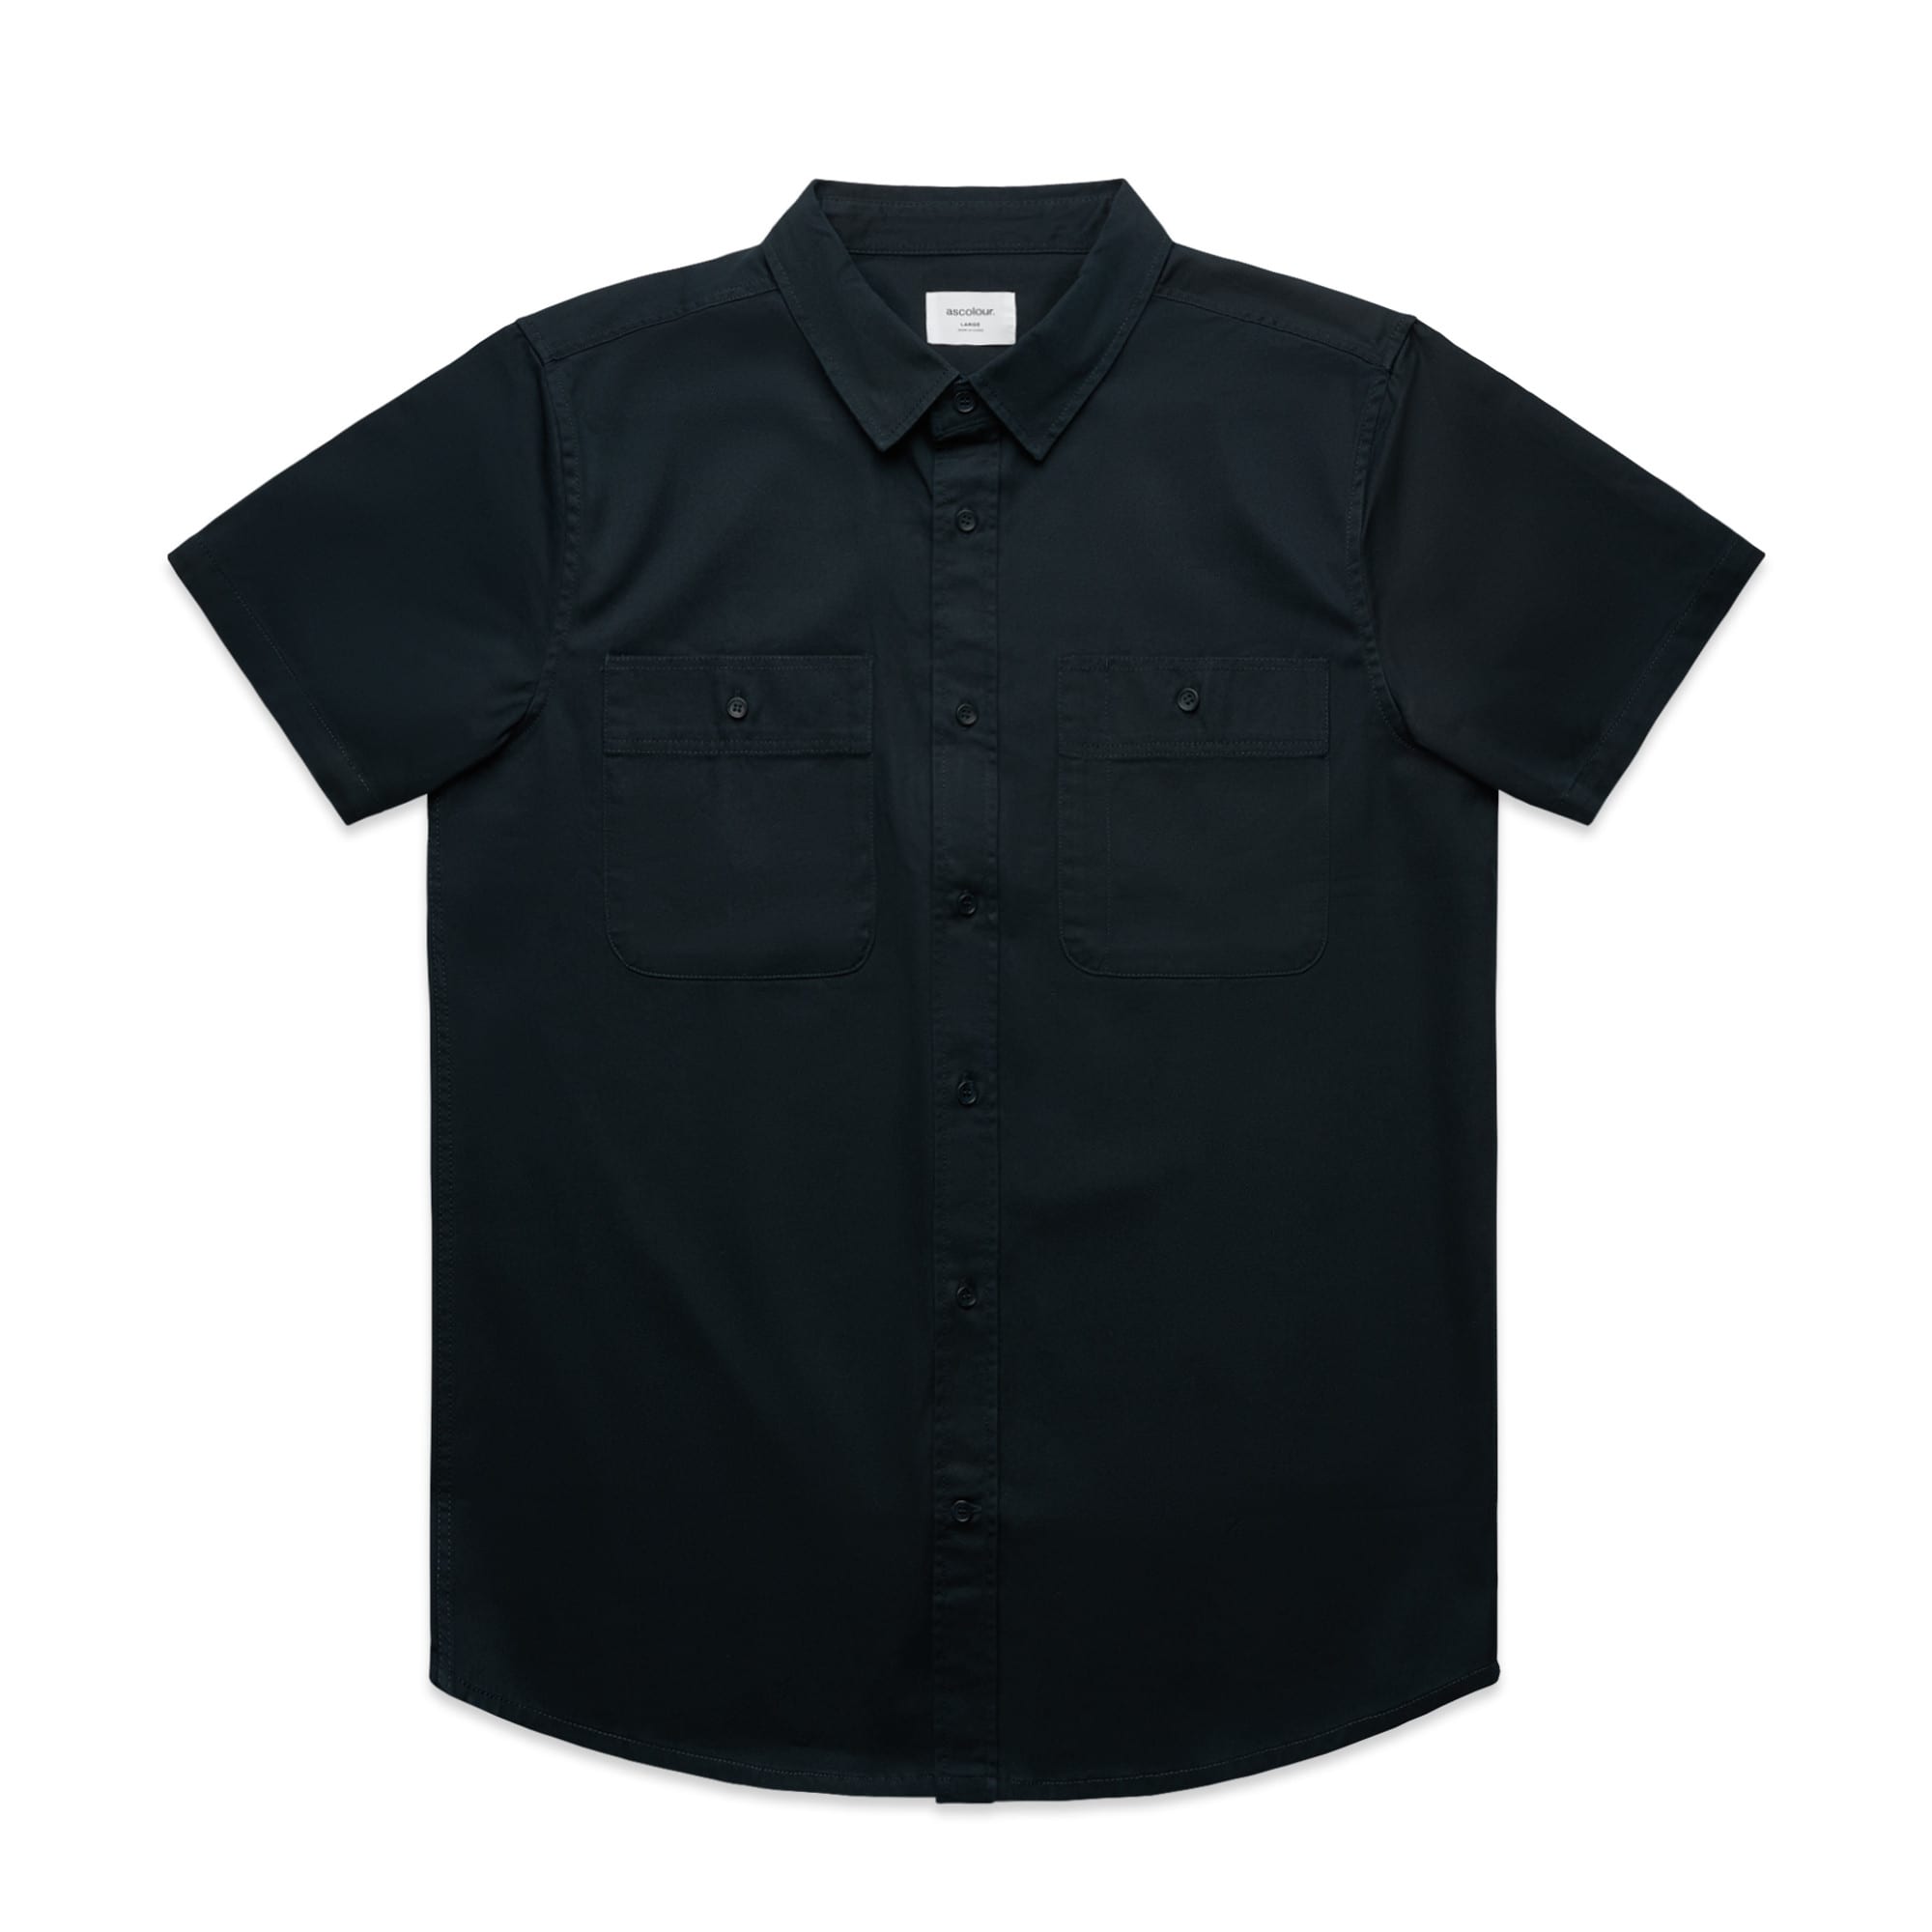 Work Ss Shirt - MONTYS PROMO PRODUCTS & CORPORATE APPAREL | FREE ...